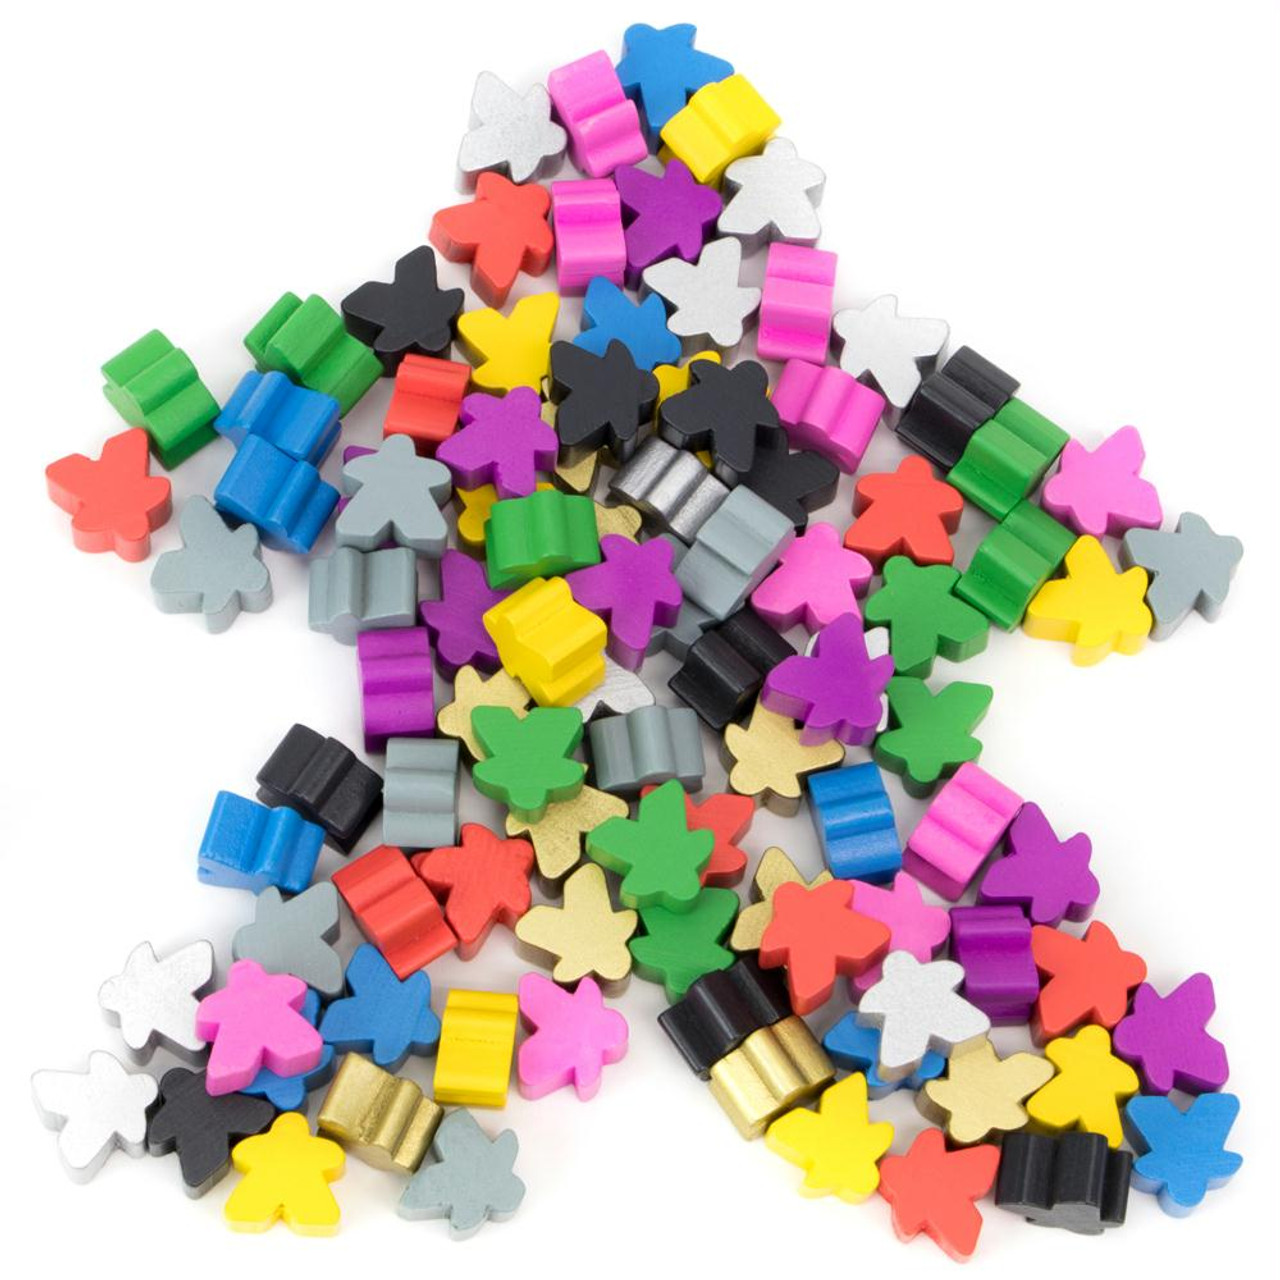 2 Meeple - Choose your color (2 inches tall)